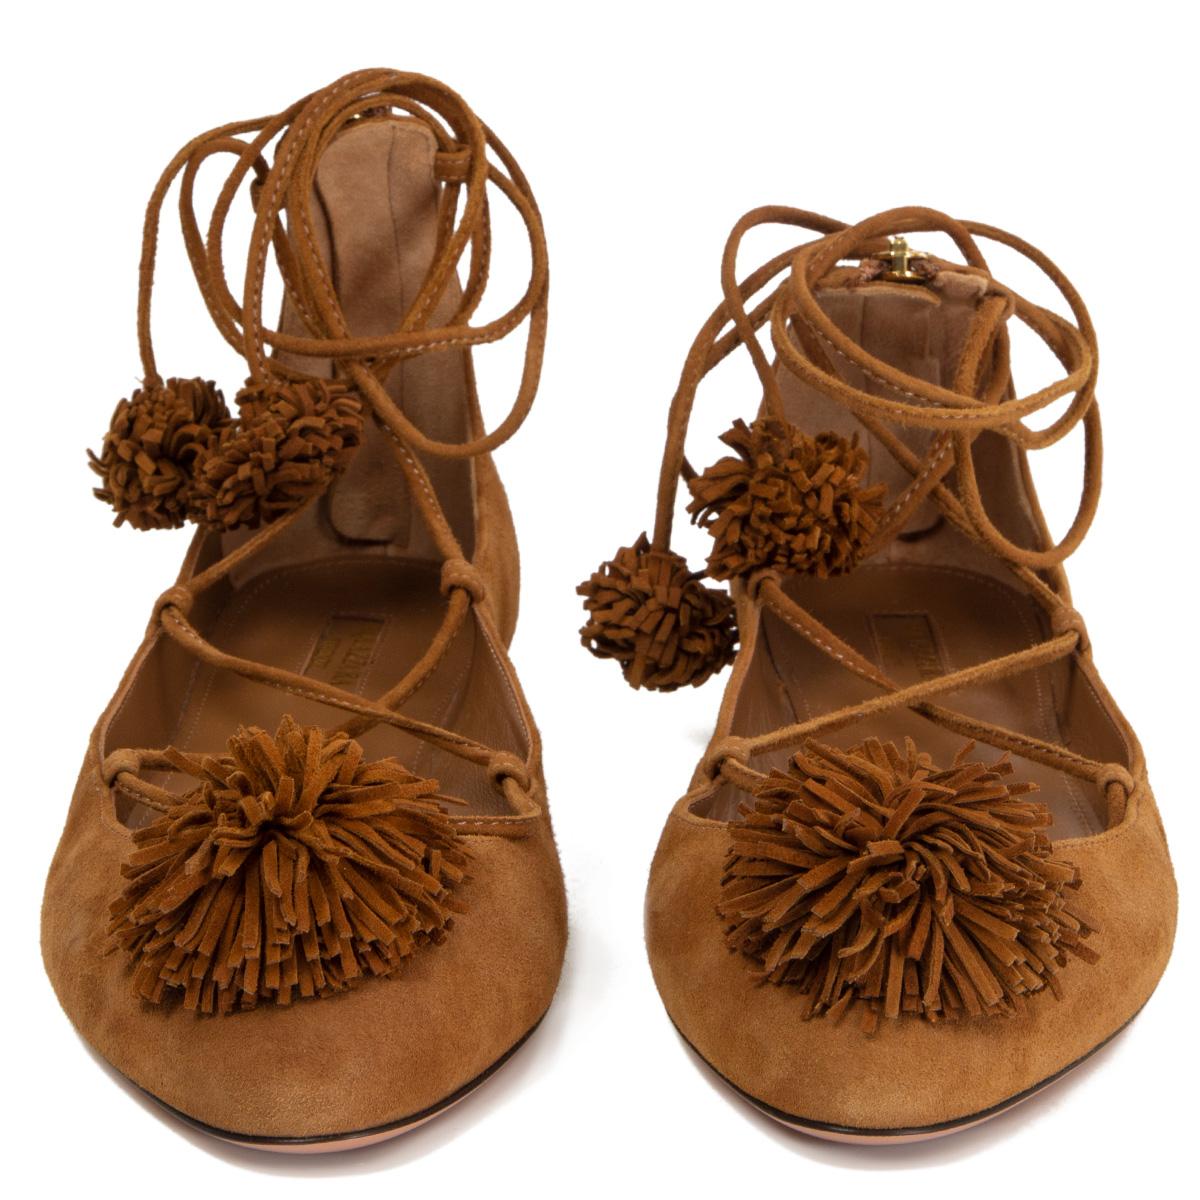 100% authentic Aquazzura Sunshine lace-up ballet flats in cognac brown suede detailed with pom-pom trims. Ghillie tie with back zipper closure. Brand new - however there is a small mark on the right shoe, on the side, near the front - see first